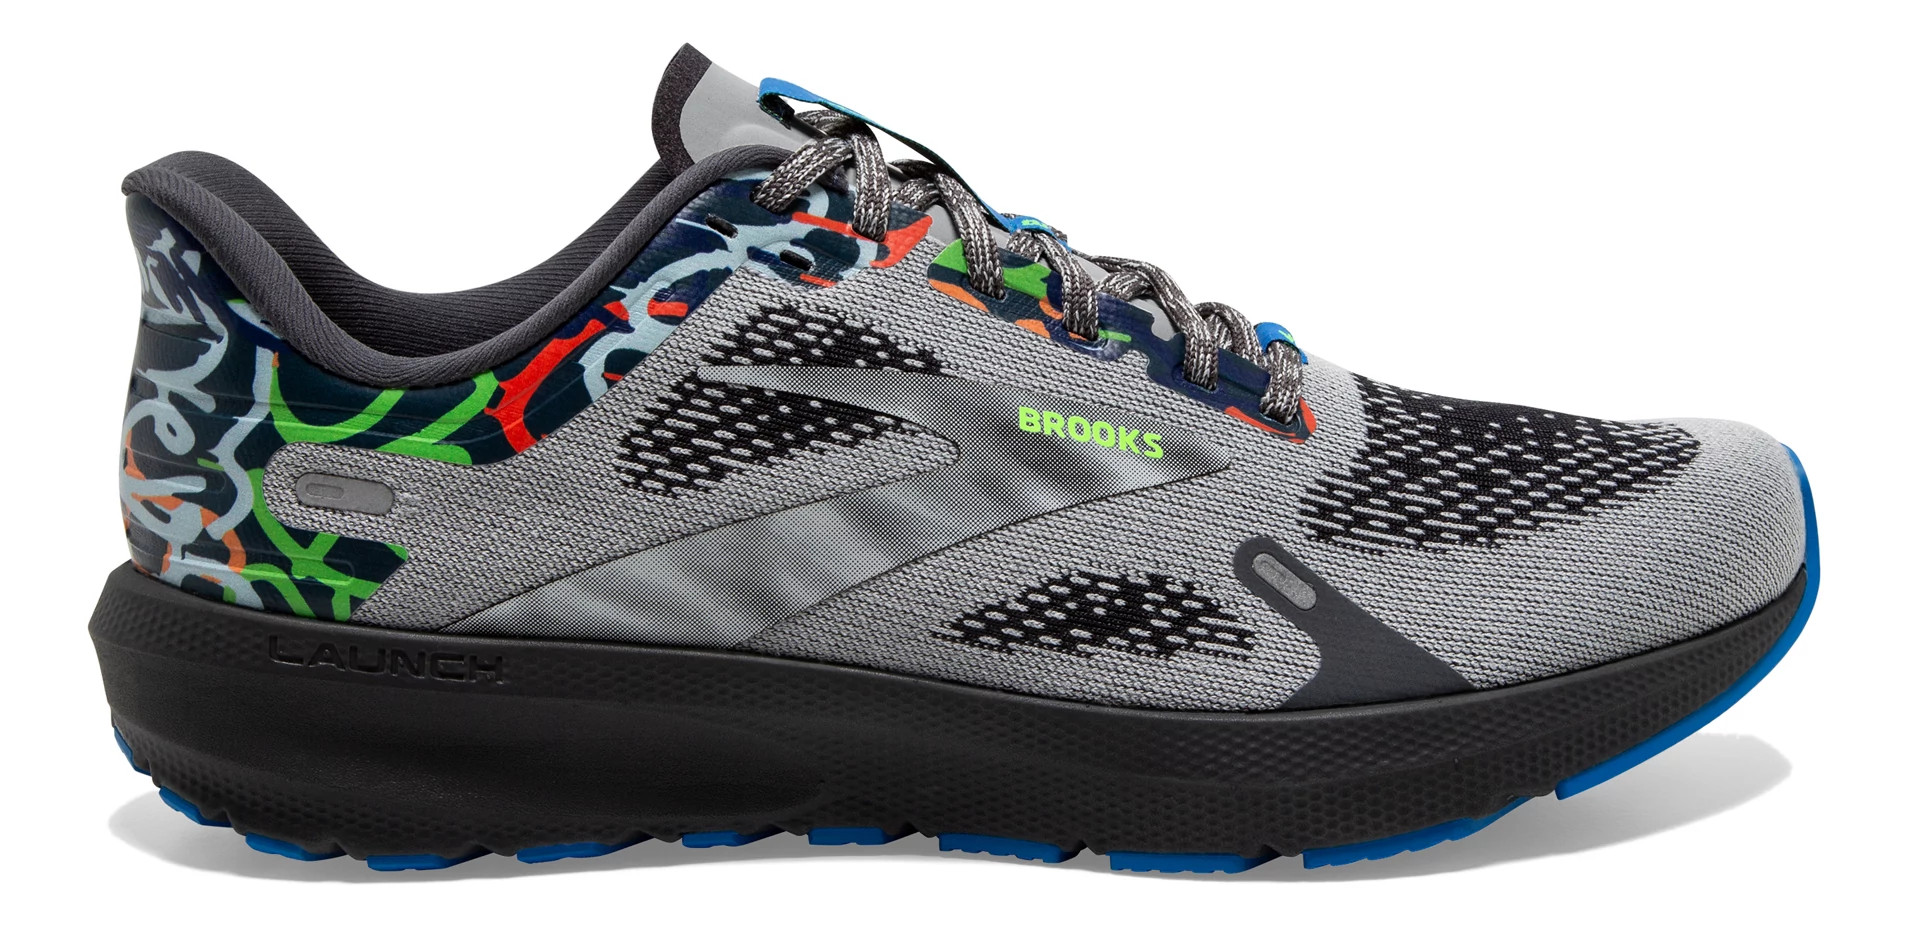 Who Sales Brooks Mens Shoes Near Raleigh Nc?